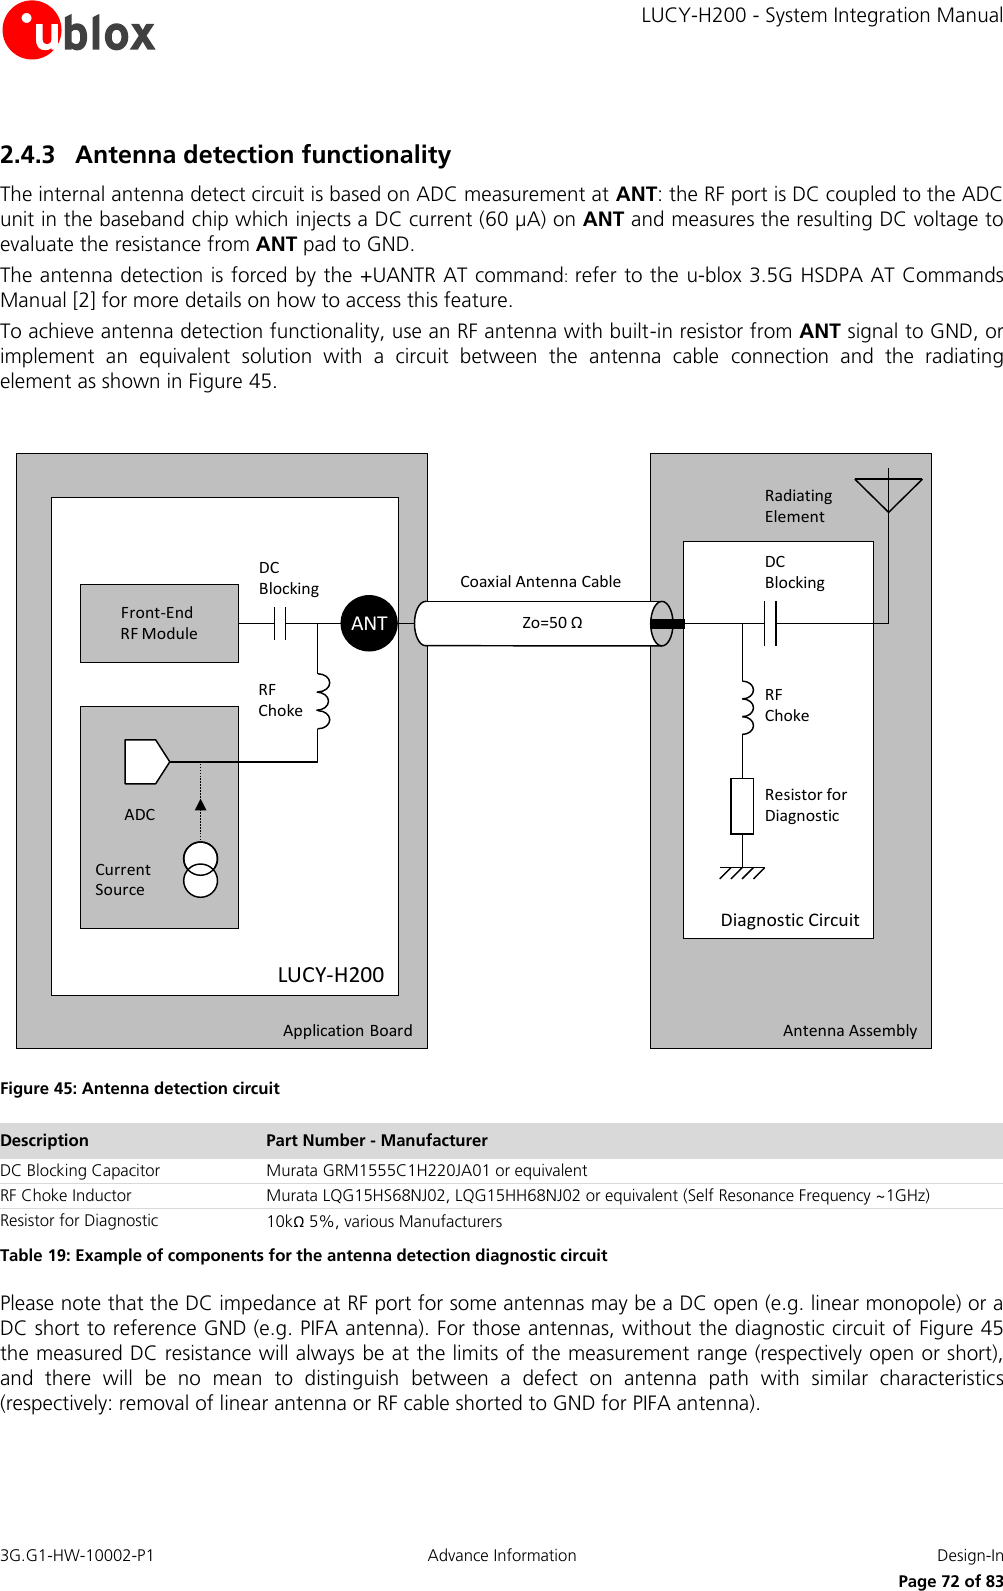     LUCY-H200 - System Integration Manual 3G.G1-HW-10002-P1  Advance Information  Design-In      Page 72 of 83 2.4.3 Antenna detection functionality The internal antenna detect circuit is based on ADC measurement at ANT: the RF port is DC coupled to the ADC unit in the baseband chip which injects a DC current (60 µA) on ANT and measures the resulting DC voltage to evaluate the resistance from ANT pad to GND. The antenna detection is forced by the +UANTR AT command: refer to the u-blox 3.5G HSDPA AT Commands Manual [2] for more details on how to access this feature. To achieve antenna detection functionality, use an RF antenna with built-in resistor from ANT signal to GND, or implement  an  equivalent  solution  with  a  circuit  between  the  antenna  cable  connection  and  the  radiating element as shown in Figure 45. Application Board Antenna AssemblyDiagnostic CircuitLUCY-H200ADCCurrent SourceRF ChokeDC BlockingFront-End RF ModuleRF ChokeDC BlockingRadiating ElementZo=50 ΩResistor for DiagnosticCoaxial Antenna CableANT Figure 45: Antenna detection circuit Description Part Number - Manufacturer DC Blocking Capacitor  Murata GRM1555C1H220JA01 or equivalent RF Choke Inductor Murata LQG15HS68NJ02, LQG15HH68NJ02 or equivalent (Self Resonance Frequency ~1GHz) Resistor for Diagnostic  10kΩ 5%, various Manufacturers Table 19: Example of components for the antenna detection diagnostic circuit Please note that the DC impedance at RF port for some antennas may be a DC open (e.g. linear monopole) or a DC short to reference GND (e.g. PIFA antenna). For those antennas, without the diagnostic circuit of Figure 45 the measured DC resistance will always be at the limits of the measurement range (respectively open or short), and  there  will  be  no  mean  to  distinguish  between  a  defect  on  antenna  path  with  similar  characteristics (respectively: removal of linear antenna or RF cable shorted to GND for PIFA antenna).  